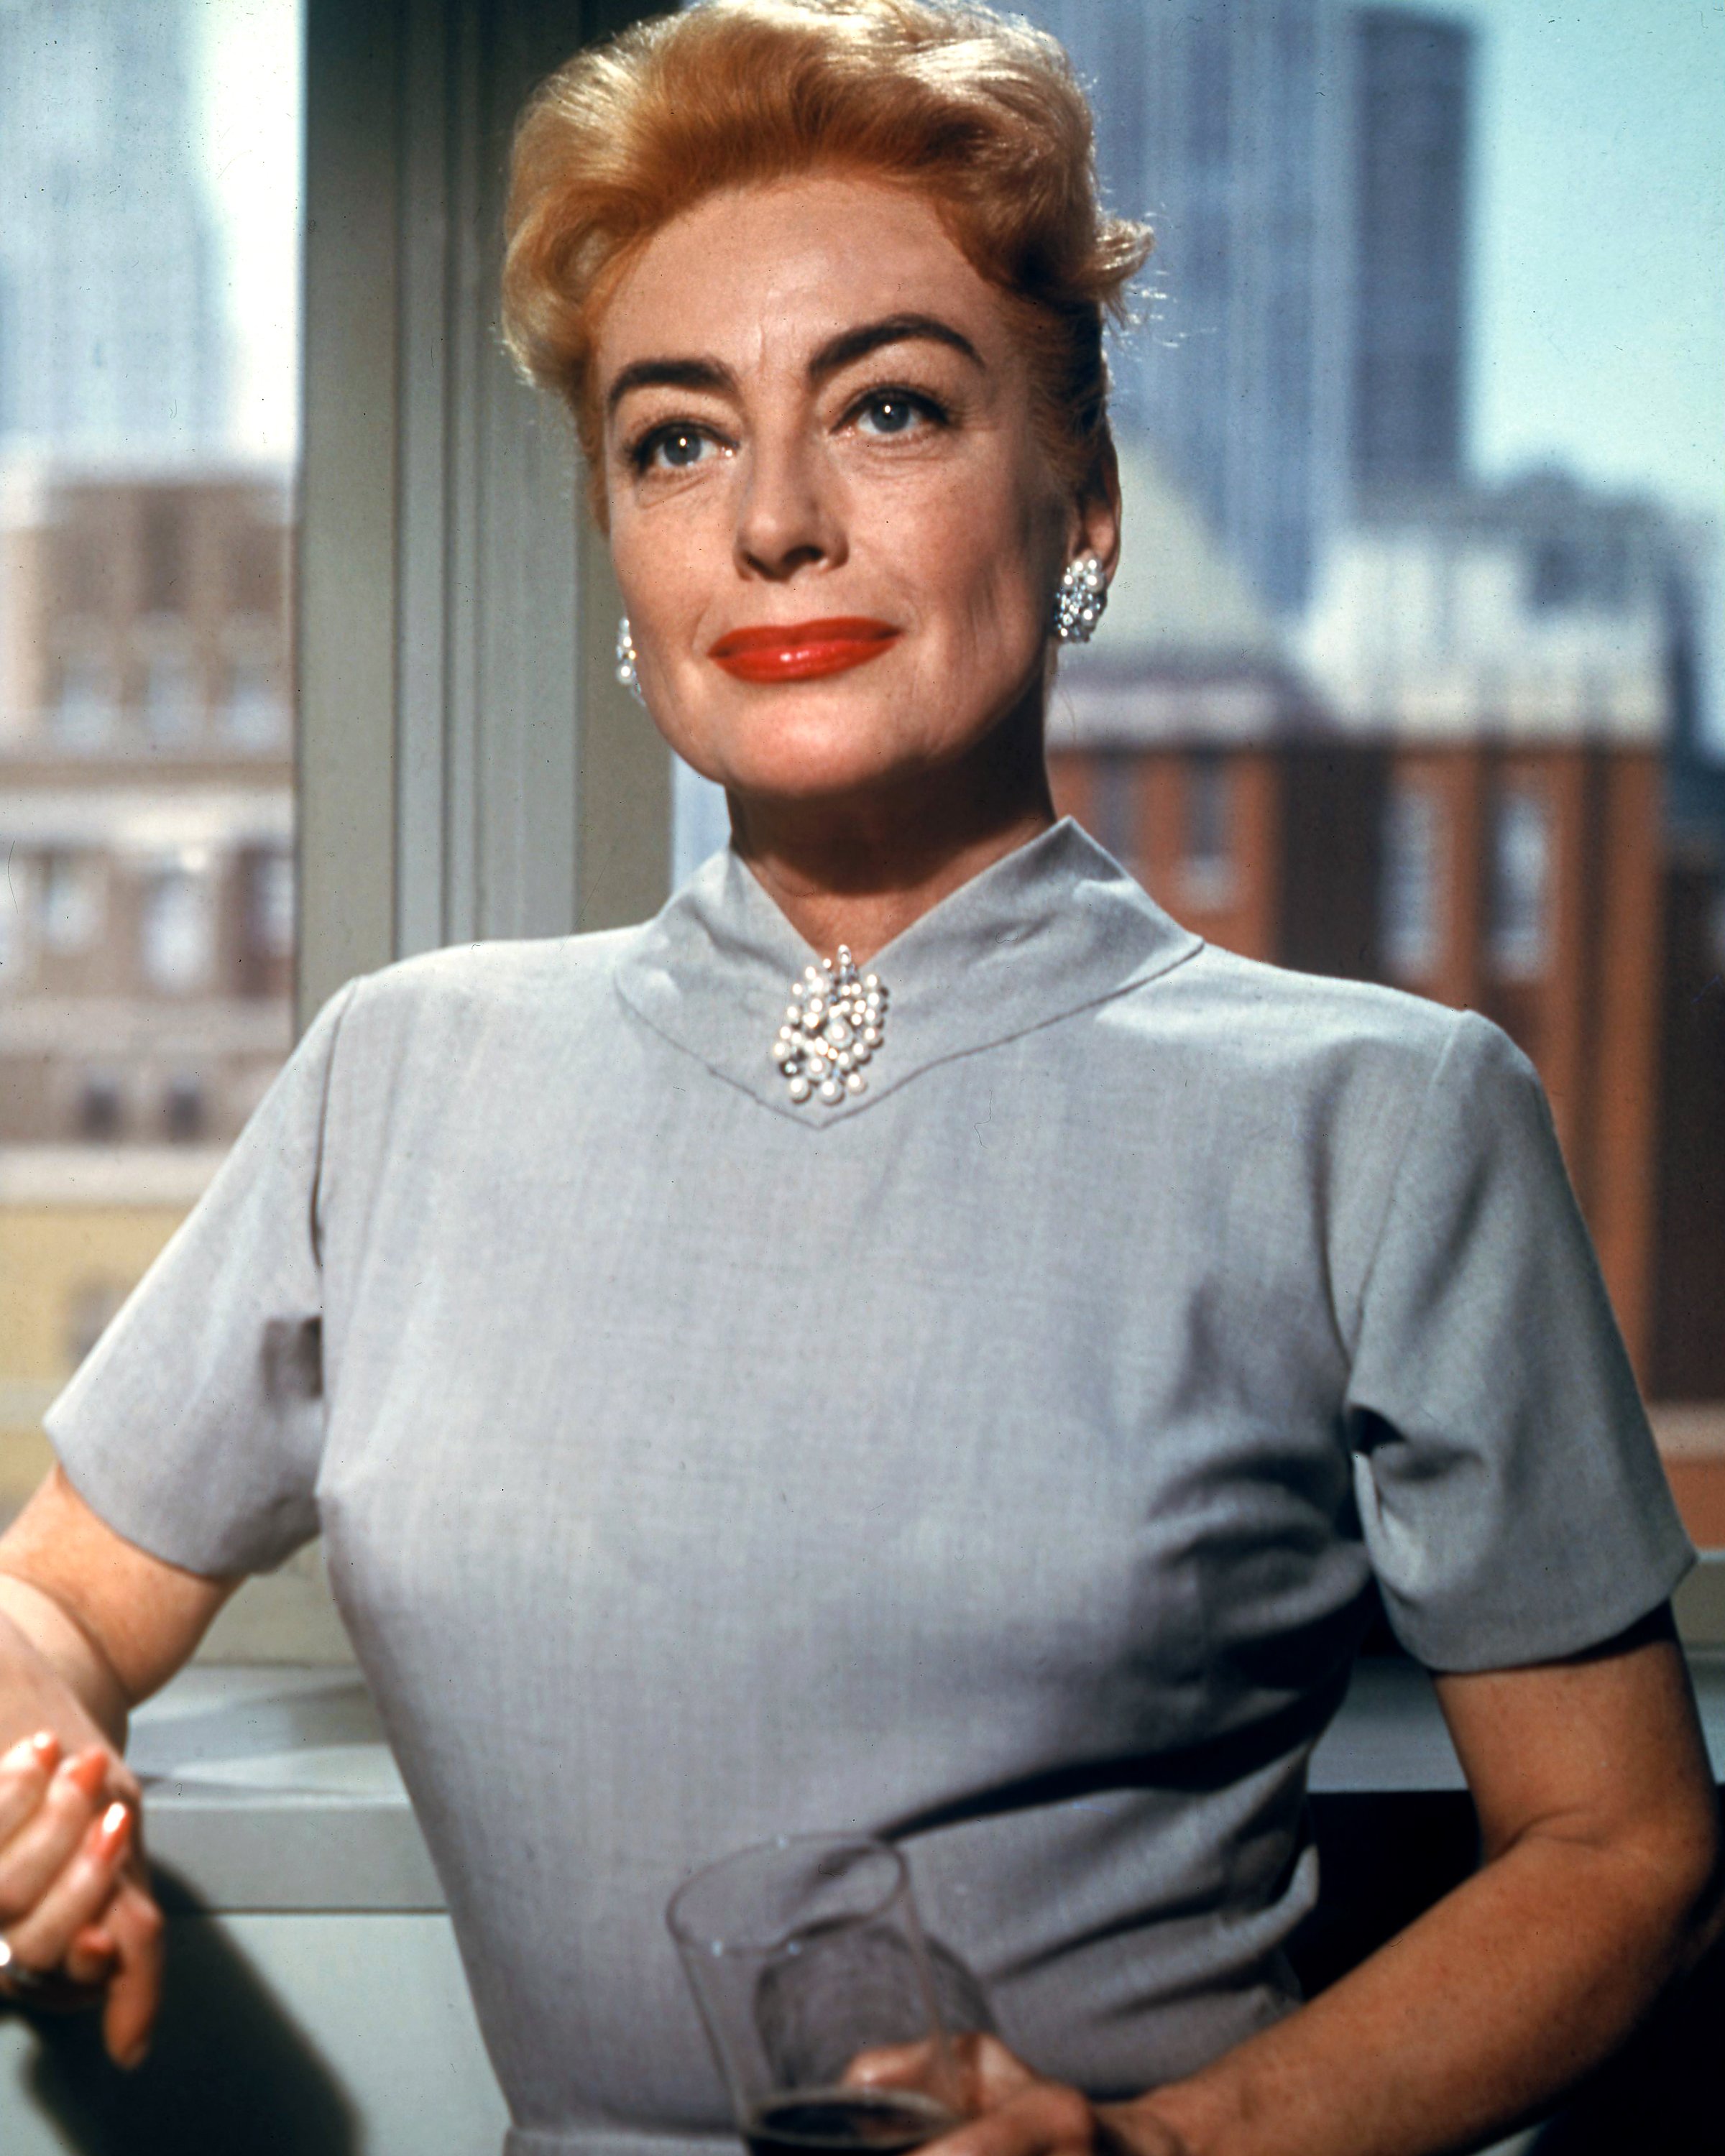 American actress Joan Crawford (1905 - 1977) in a promotional still from 'The Best Of Everything', directed by Jean Negulesco, 1959. | Source: Getty Images